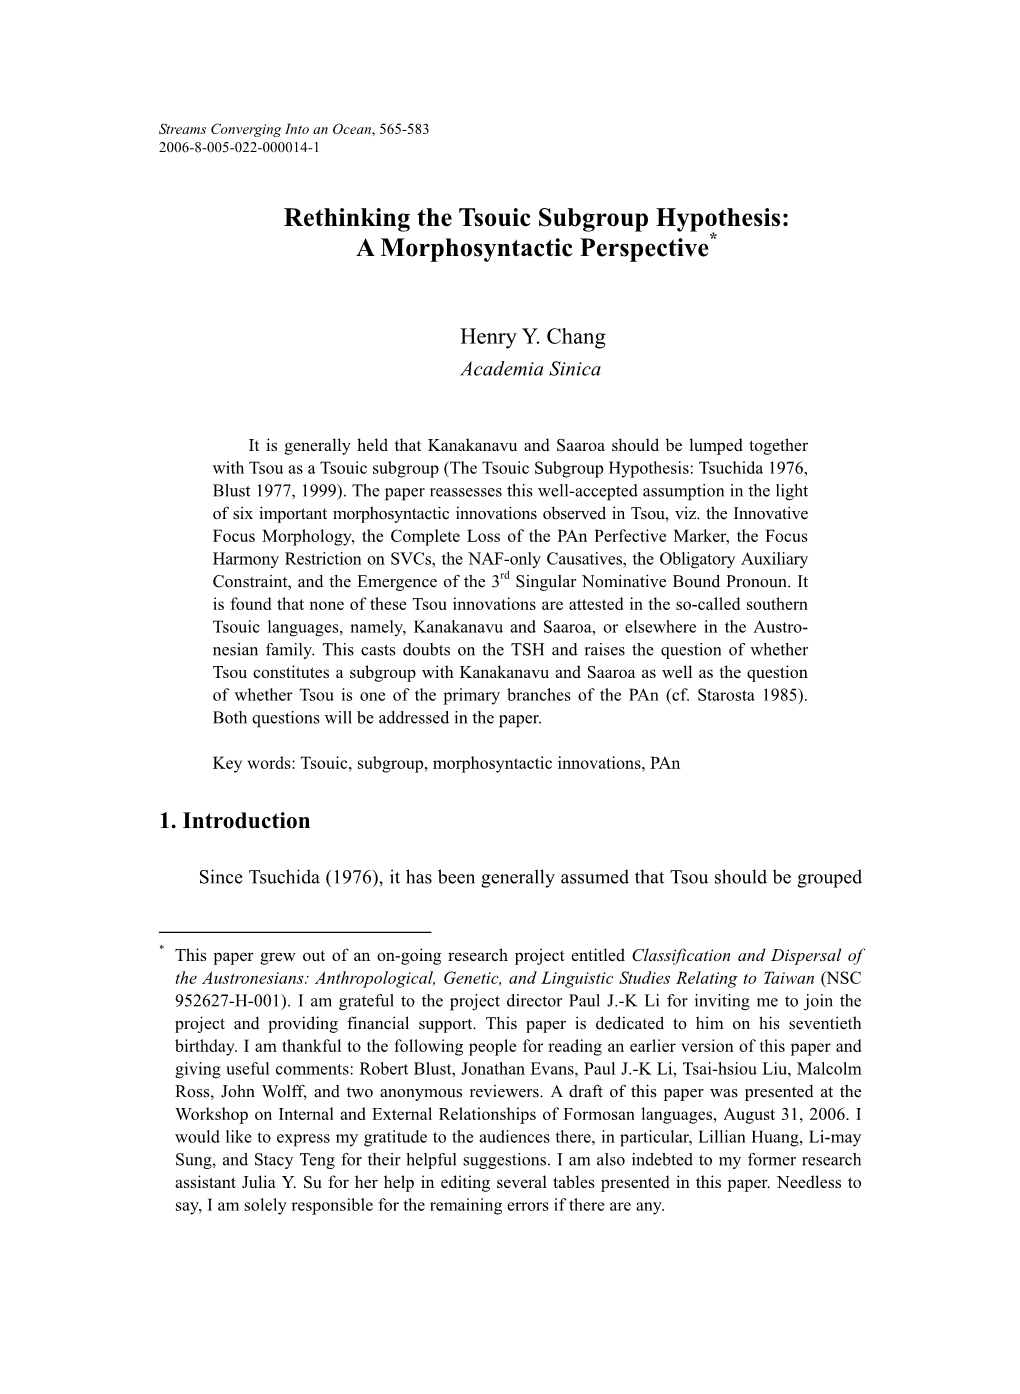 Rethinking the Tsouic Subgroup Hypothesis: a Morphosyntactic Perspective*